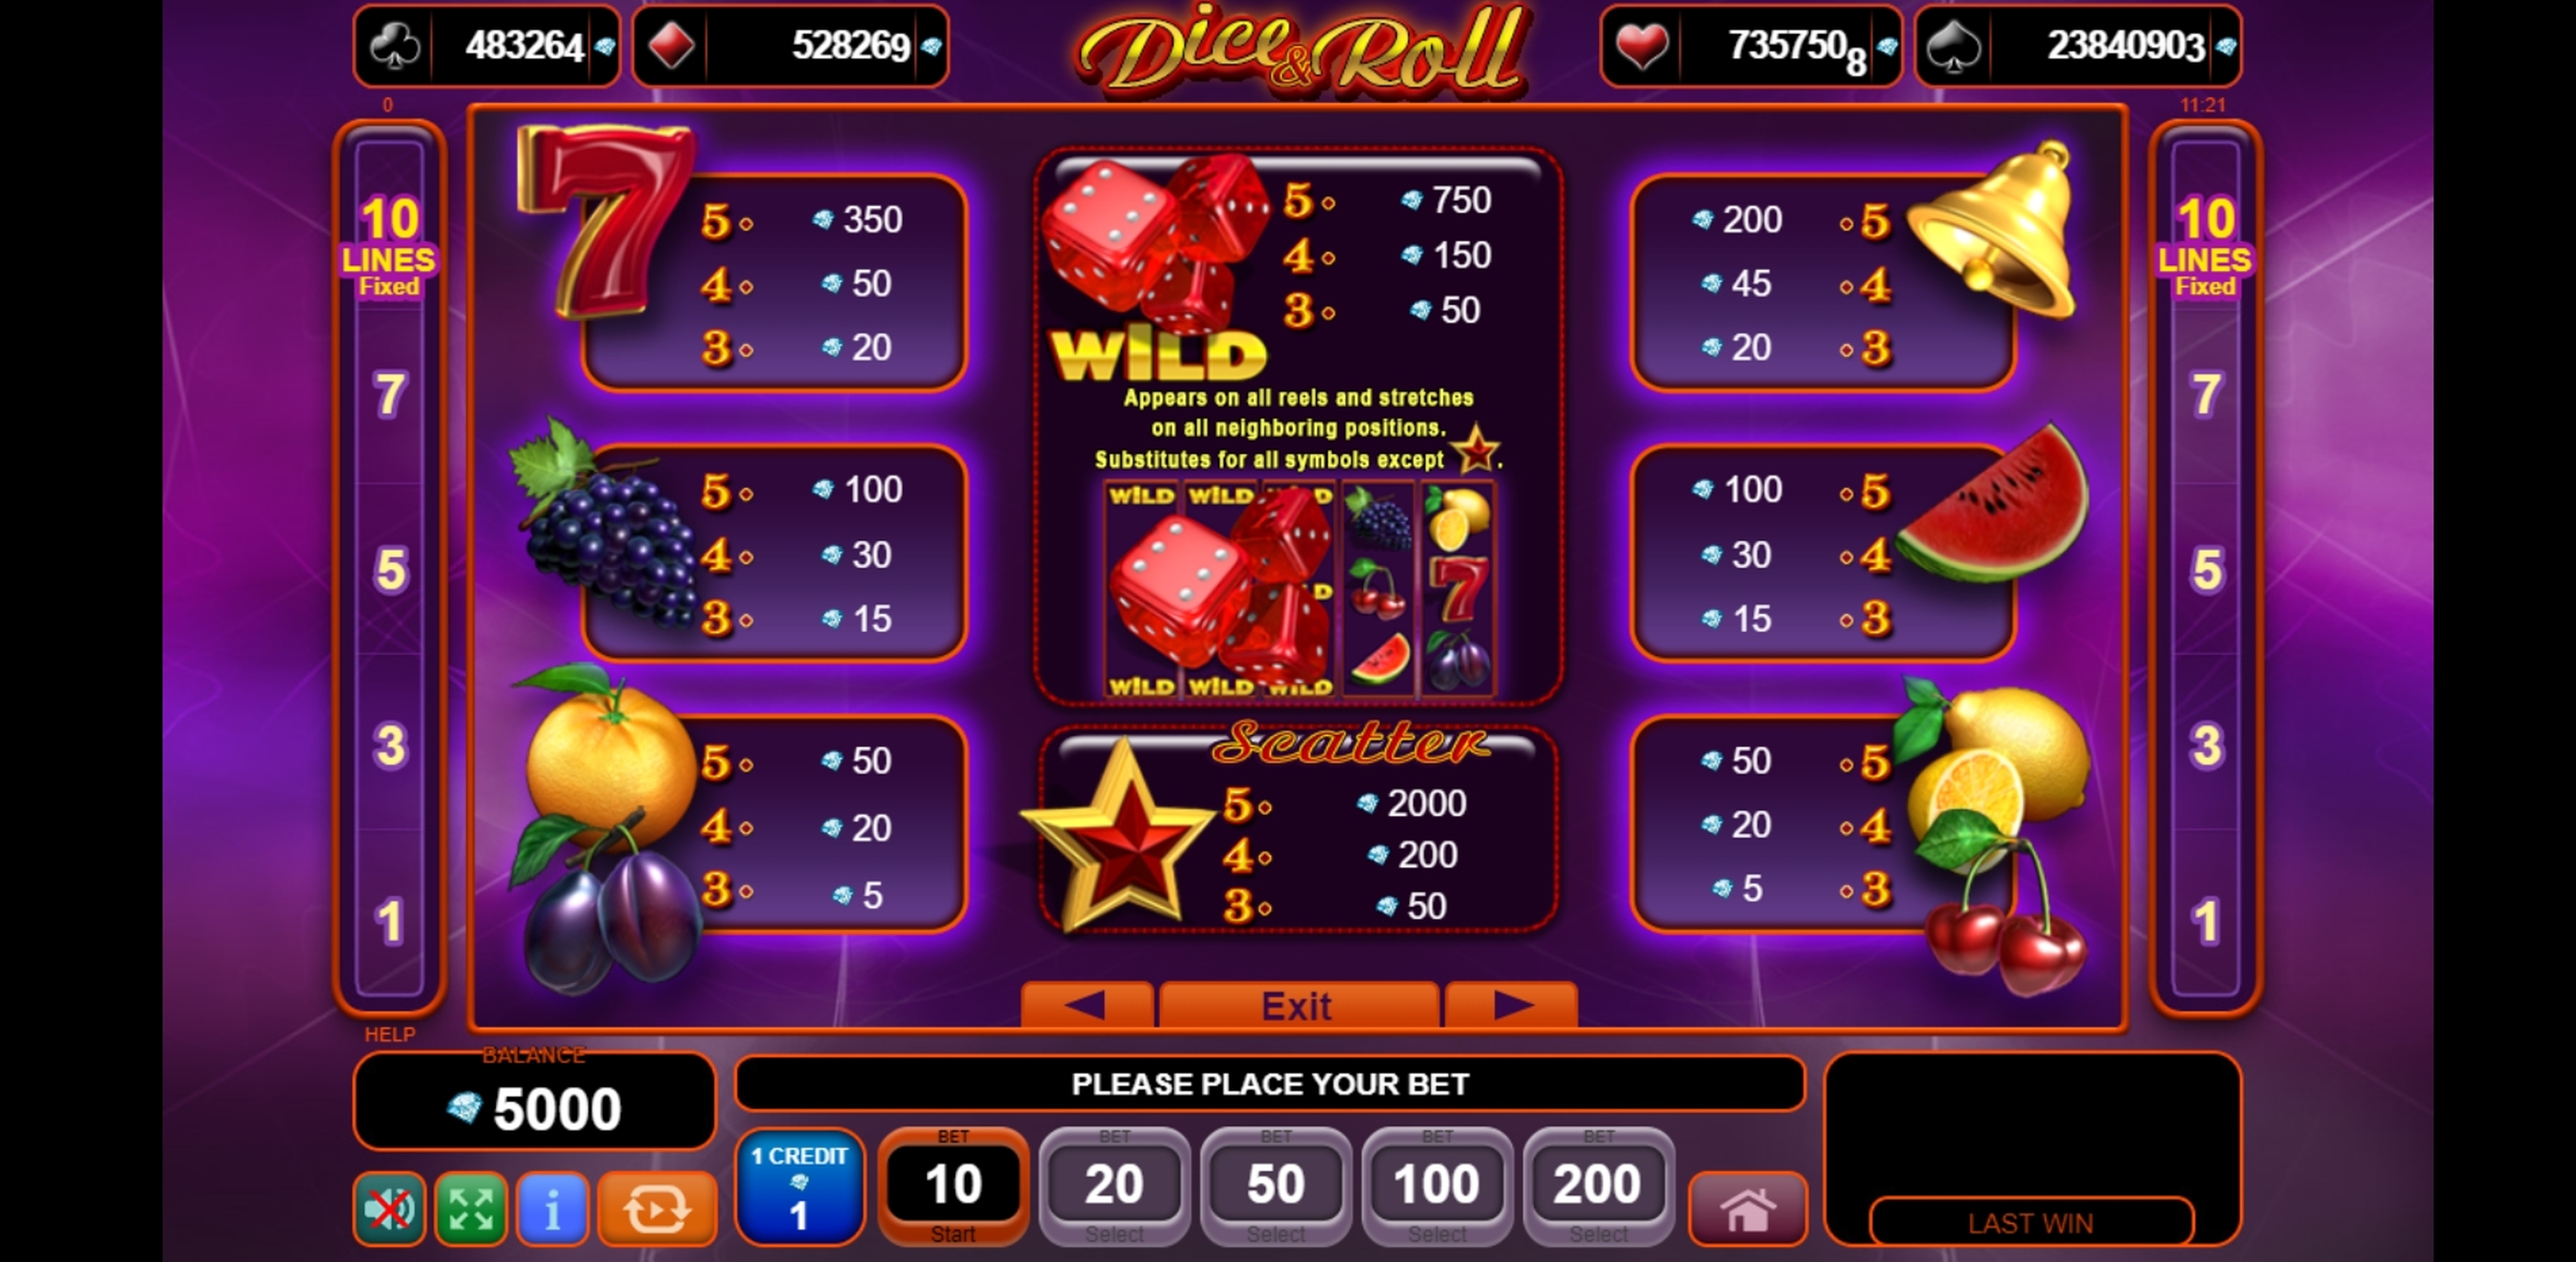 Info of Dice & Roll Slot Game by EGT